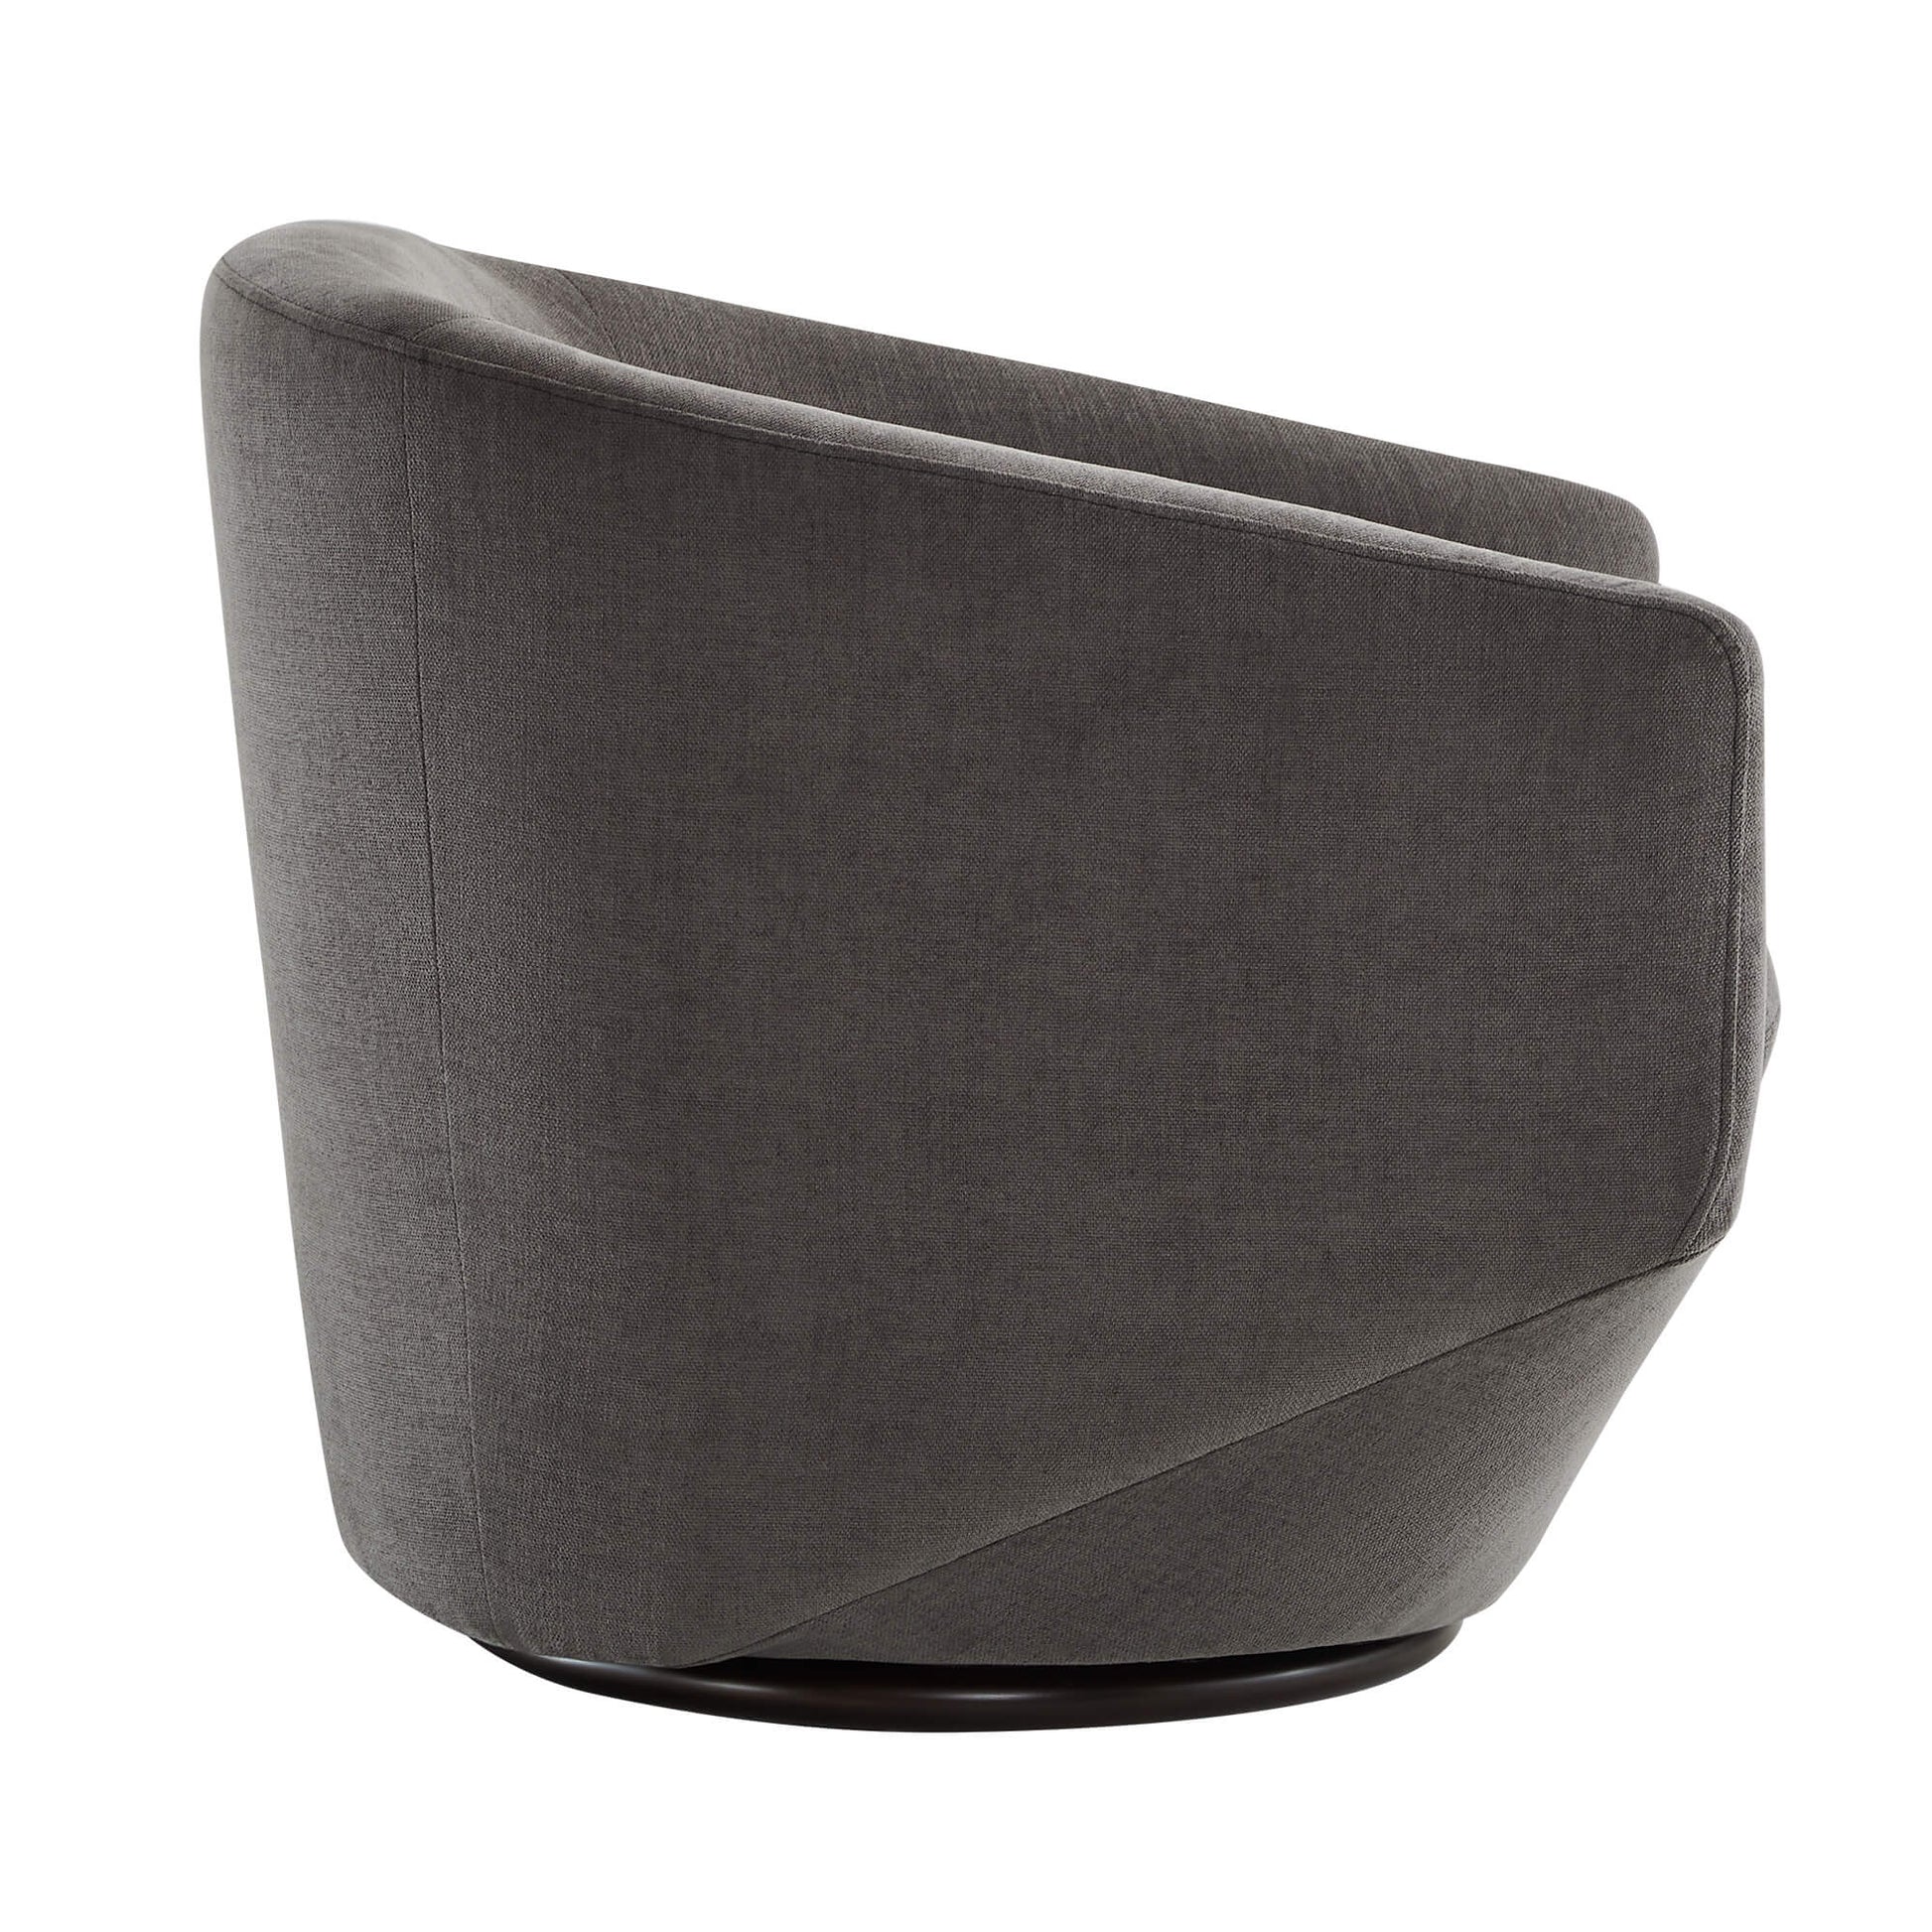 CHITA LIVING-Aria Swivel Arm Accent Chair-Accent Chair-Velvet-Gray (rPET)-